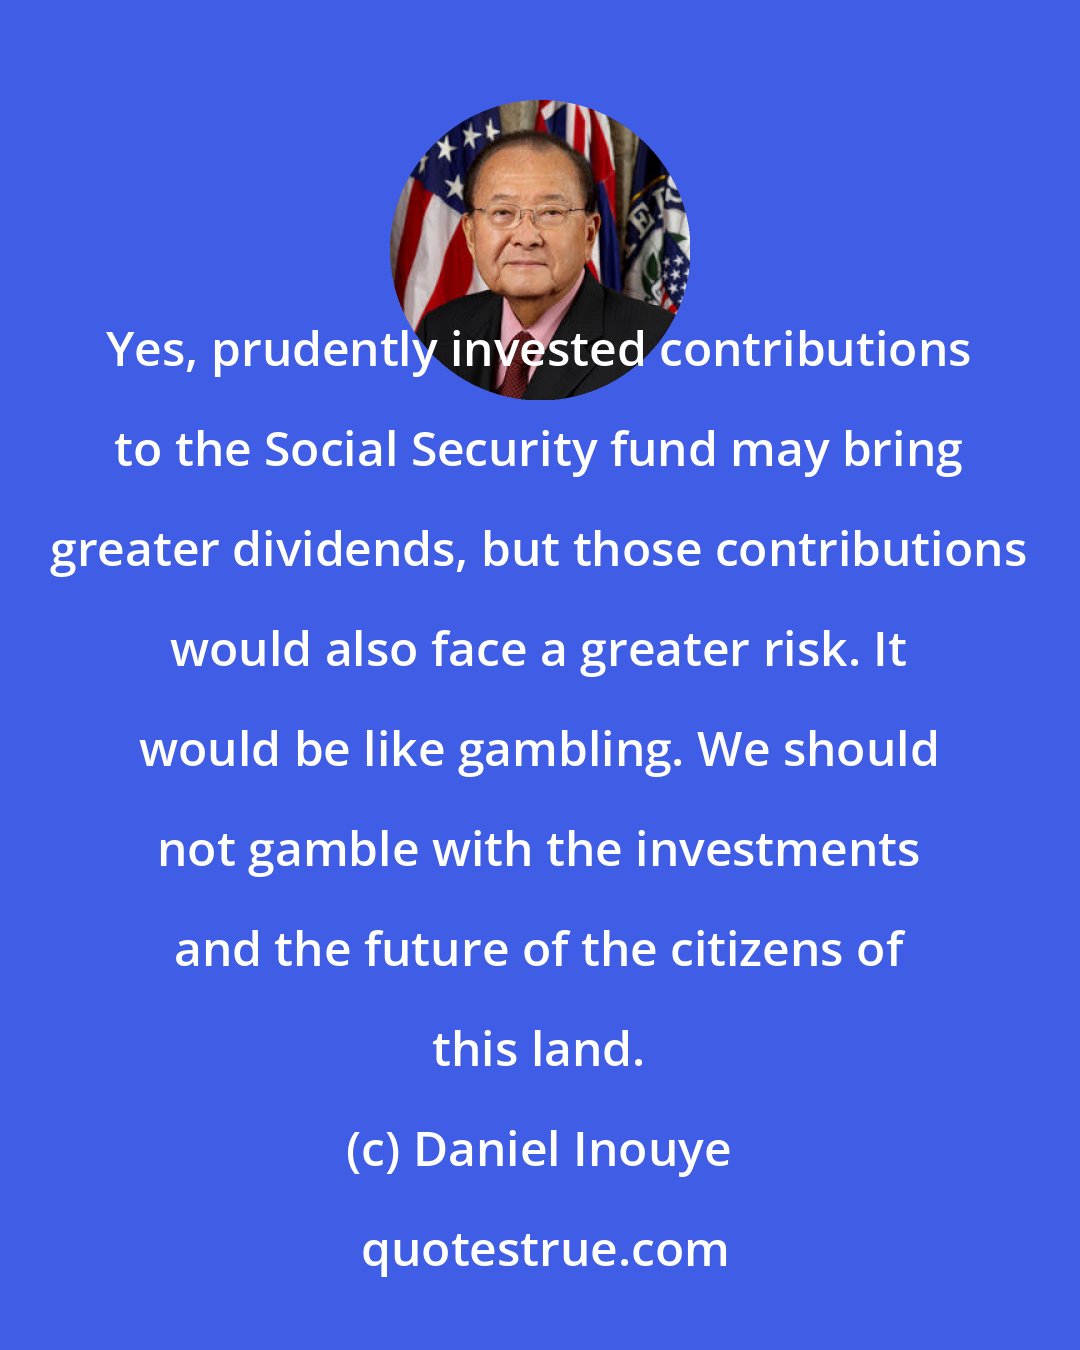 Daniel Inouye: Yes, prudently invested contributions to the Social Security fund may bring greater dividends, but those contributions would also face a greater risk. It would be like gambling. We should not gamble with the investments and the future of the citizens of this land.